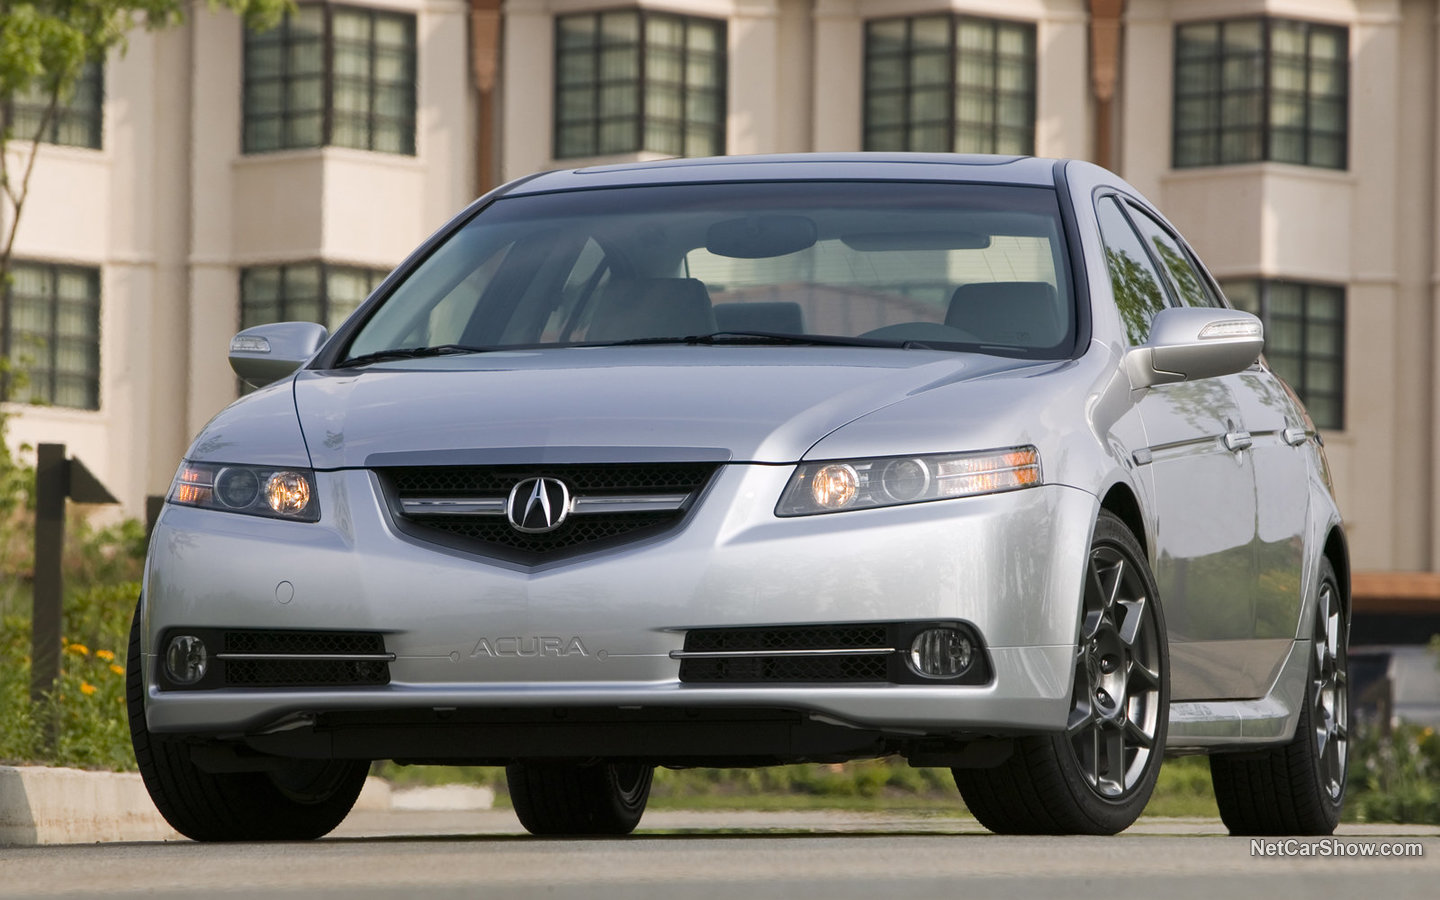 Acura TL Type-S 2007 a893a011